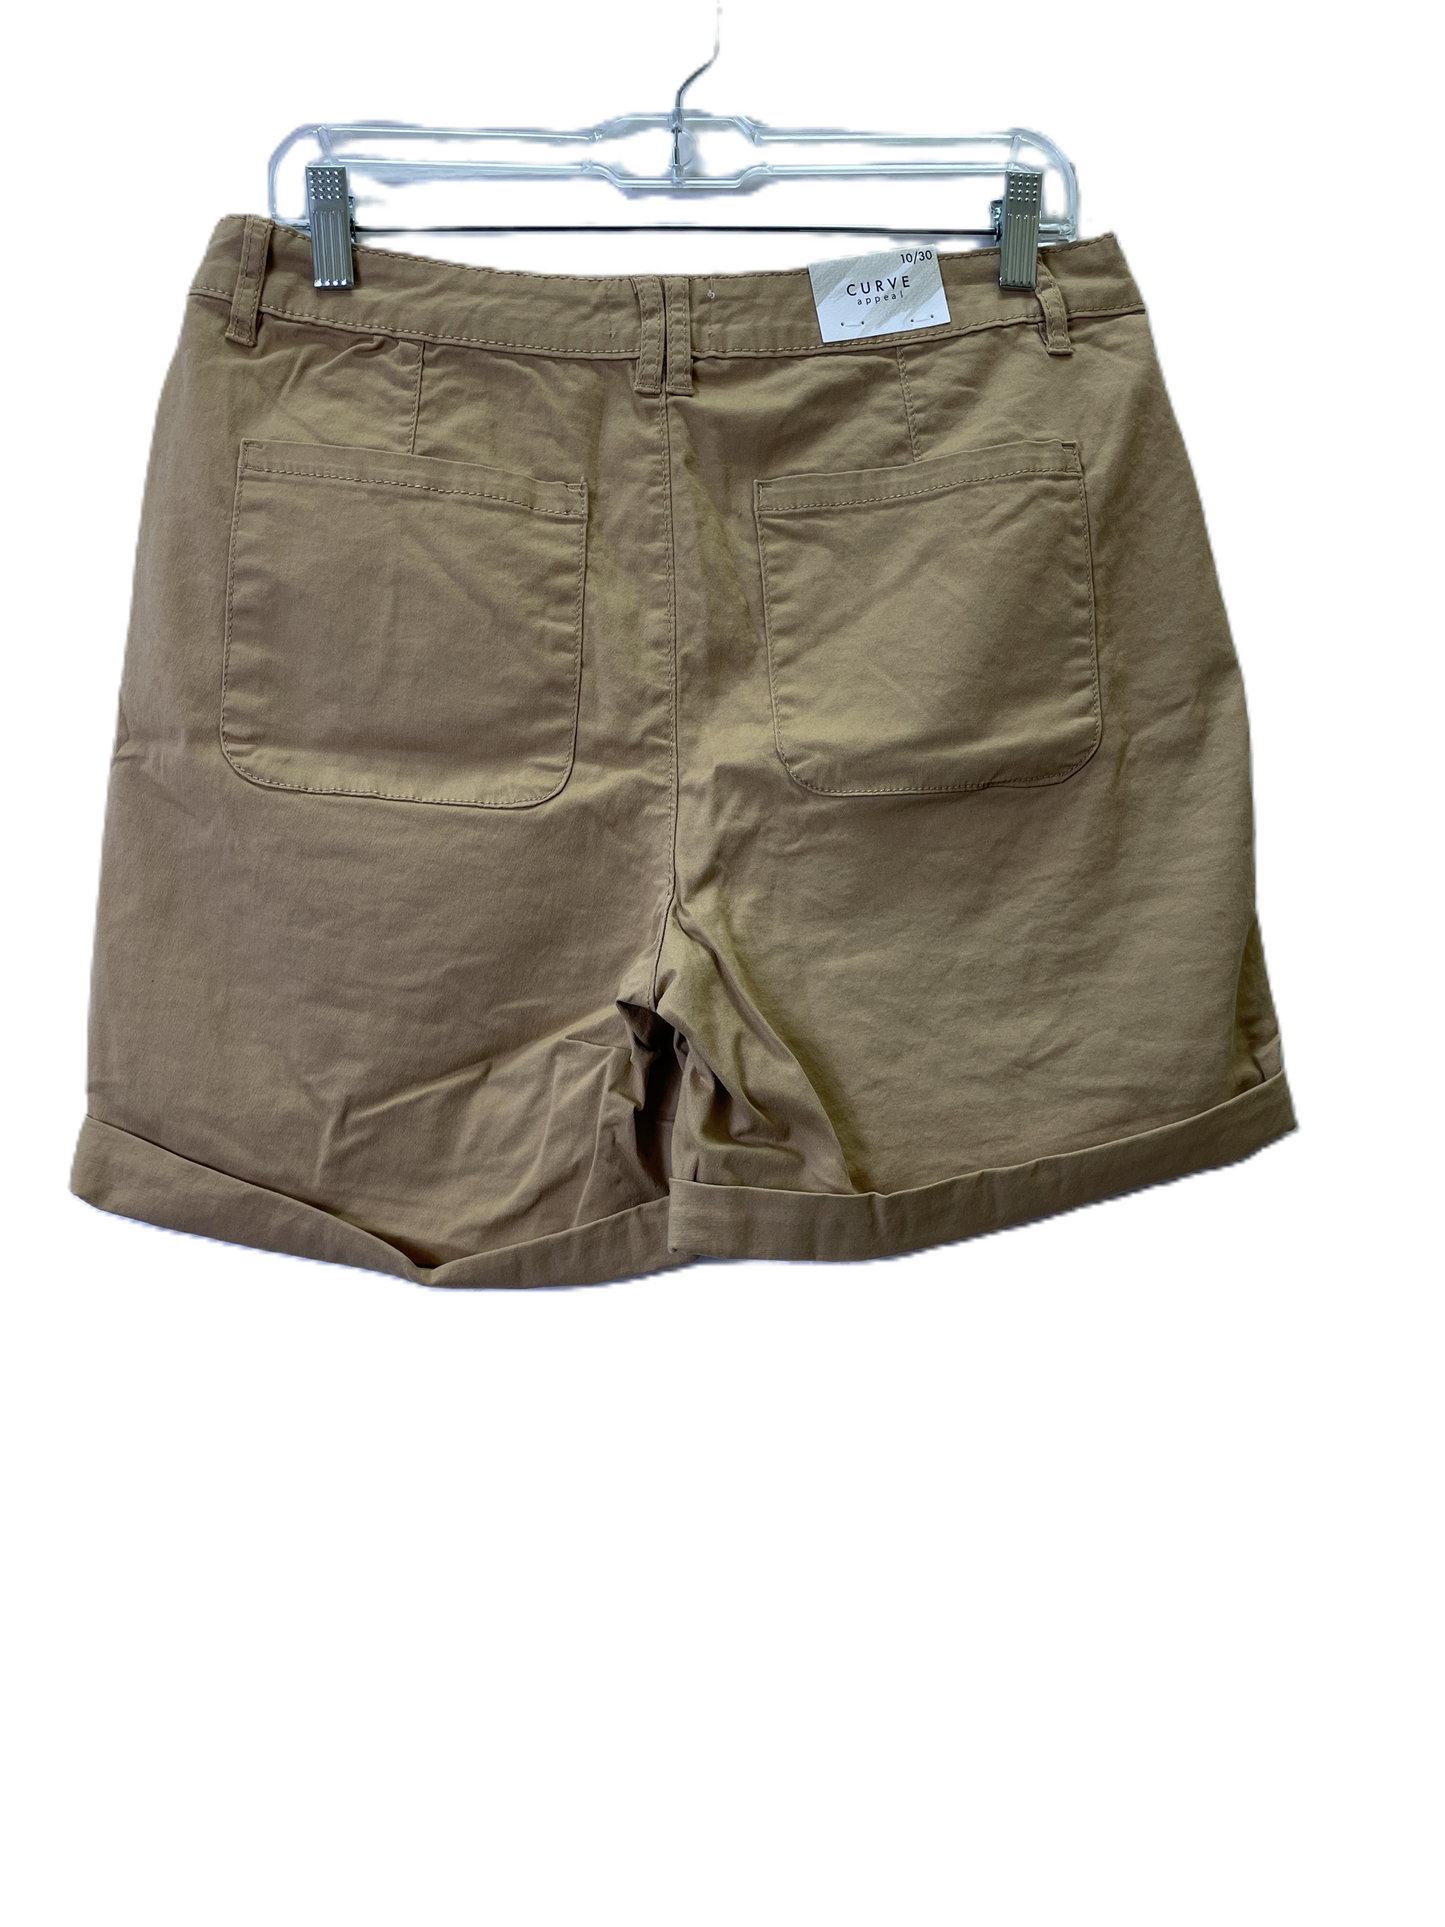 Tan Shorts By Curve Appeal, Size: 10